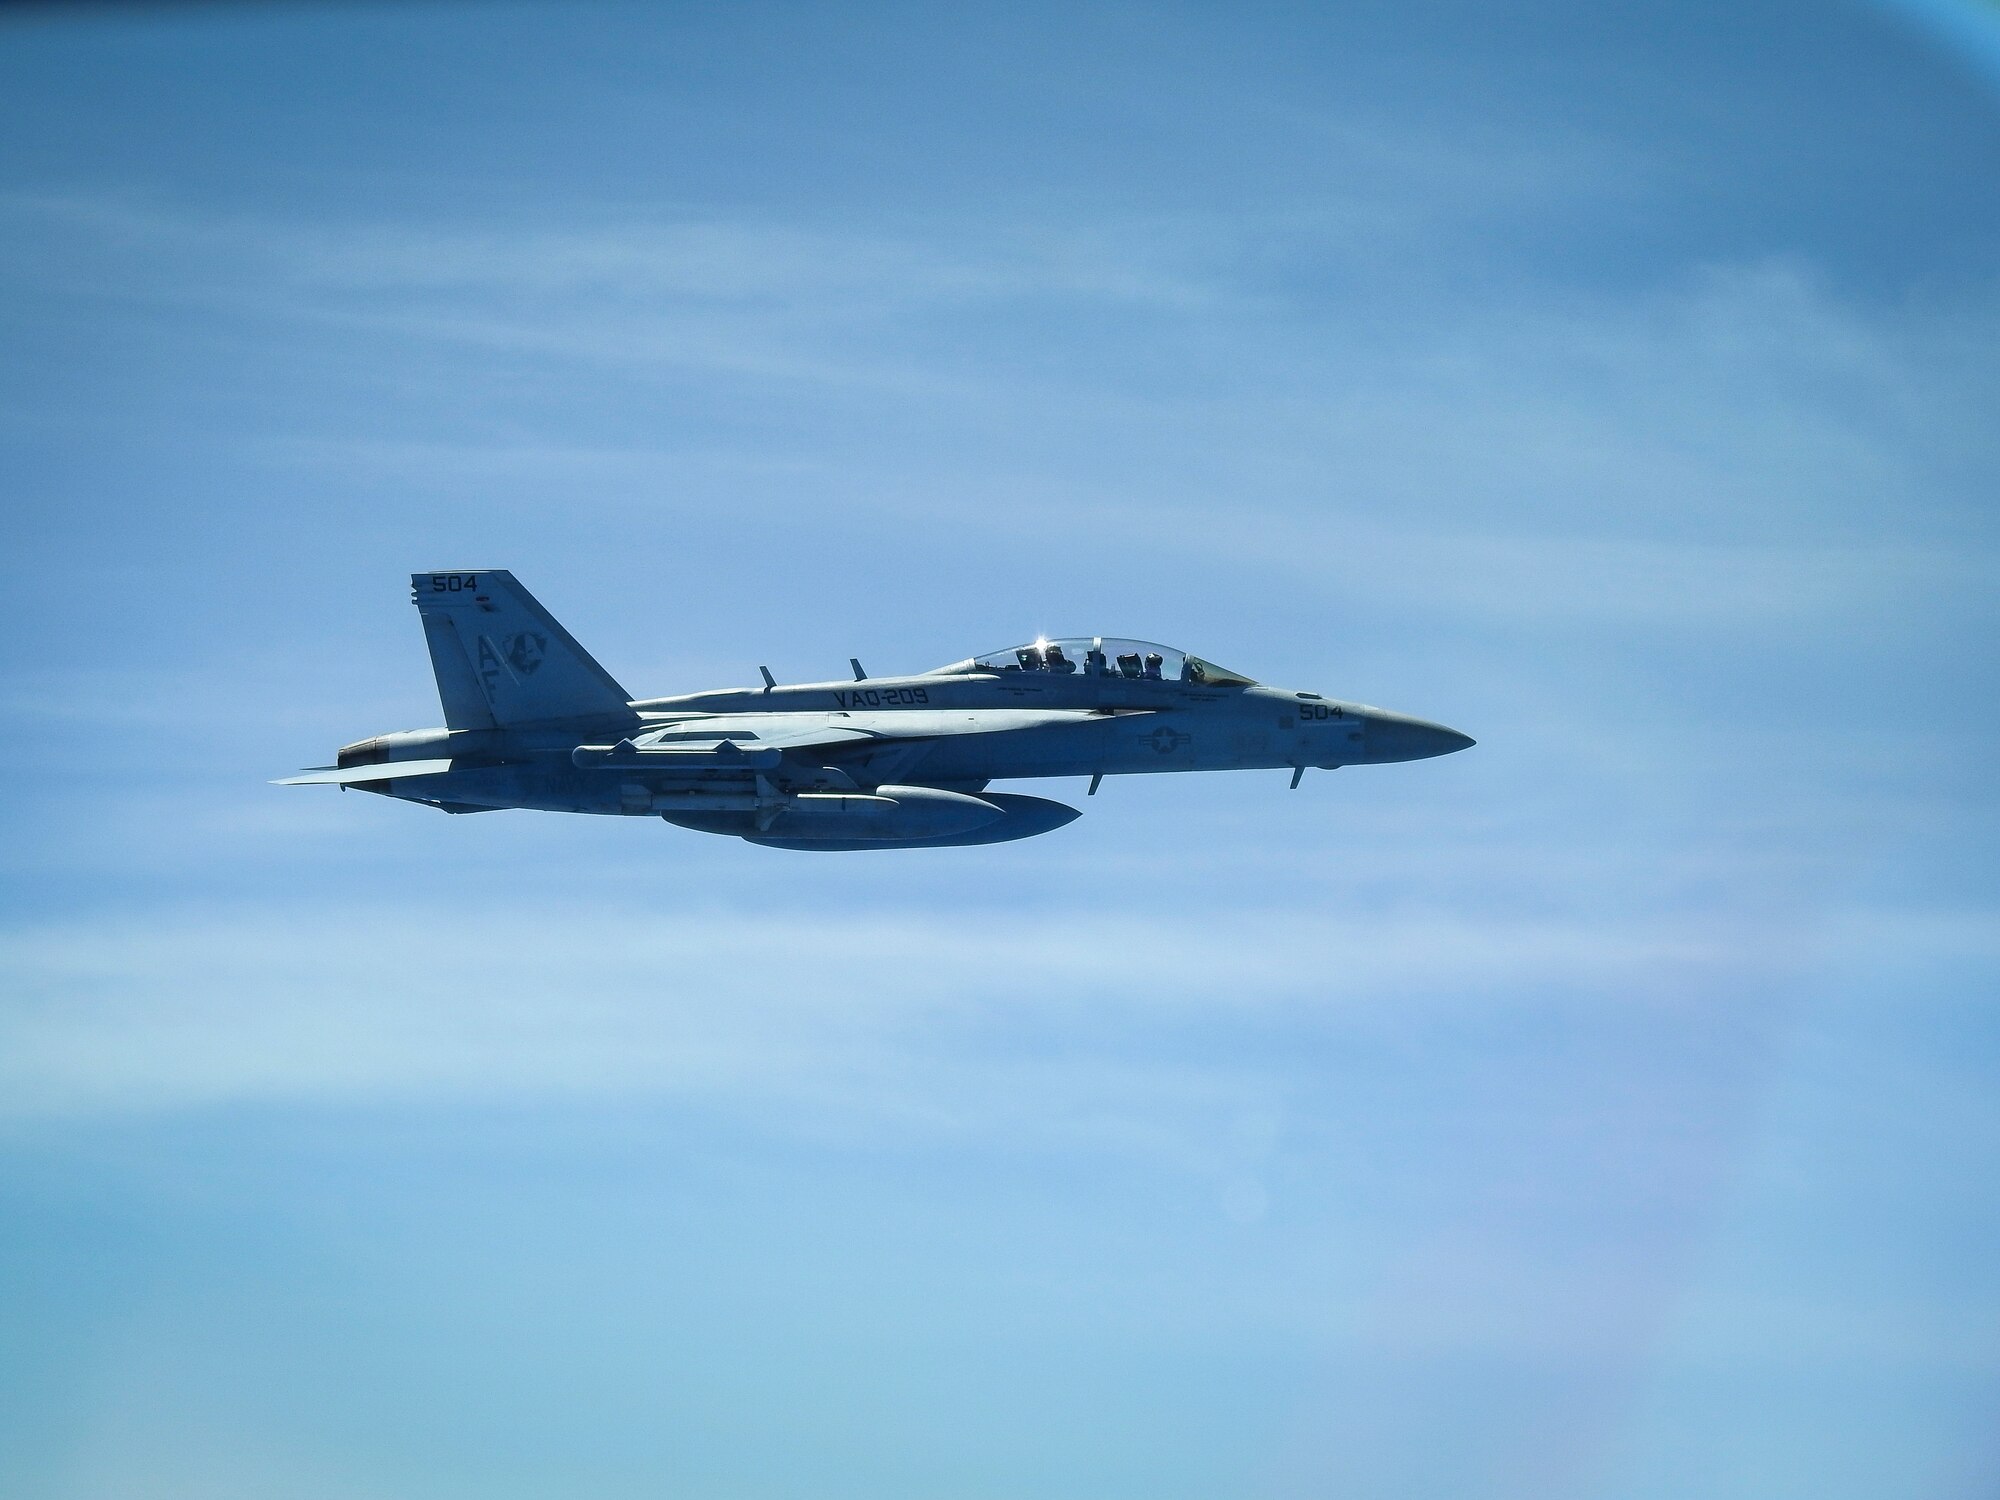 A United States Navy E/A-18G Growler from Electronic Attack Squadron 209, the “Star Warriors,” flies with a B-52H Stratofortress deployed from Barksdale Air Force Base, La., over the Sea of Japan while conducting a Bomber Task Force mission June 16, 2020. U.S. Strategic Command operations and engagements with U.S. allies and partners demonstrate and strengthen a shared commitment to global security and stability. (Courtesy photo)